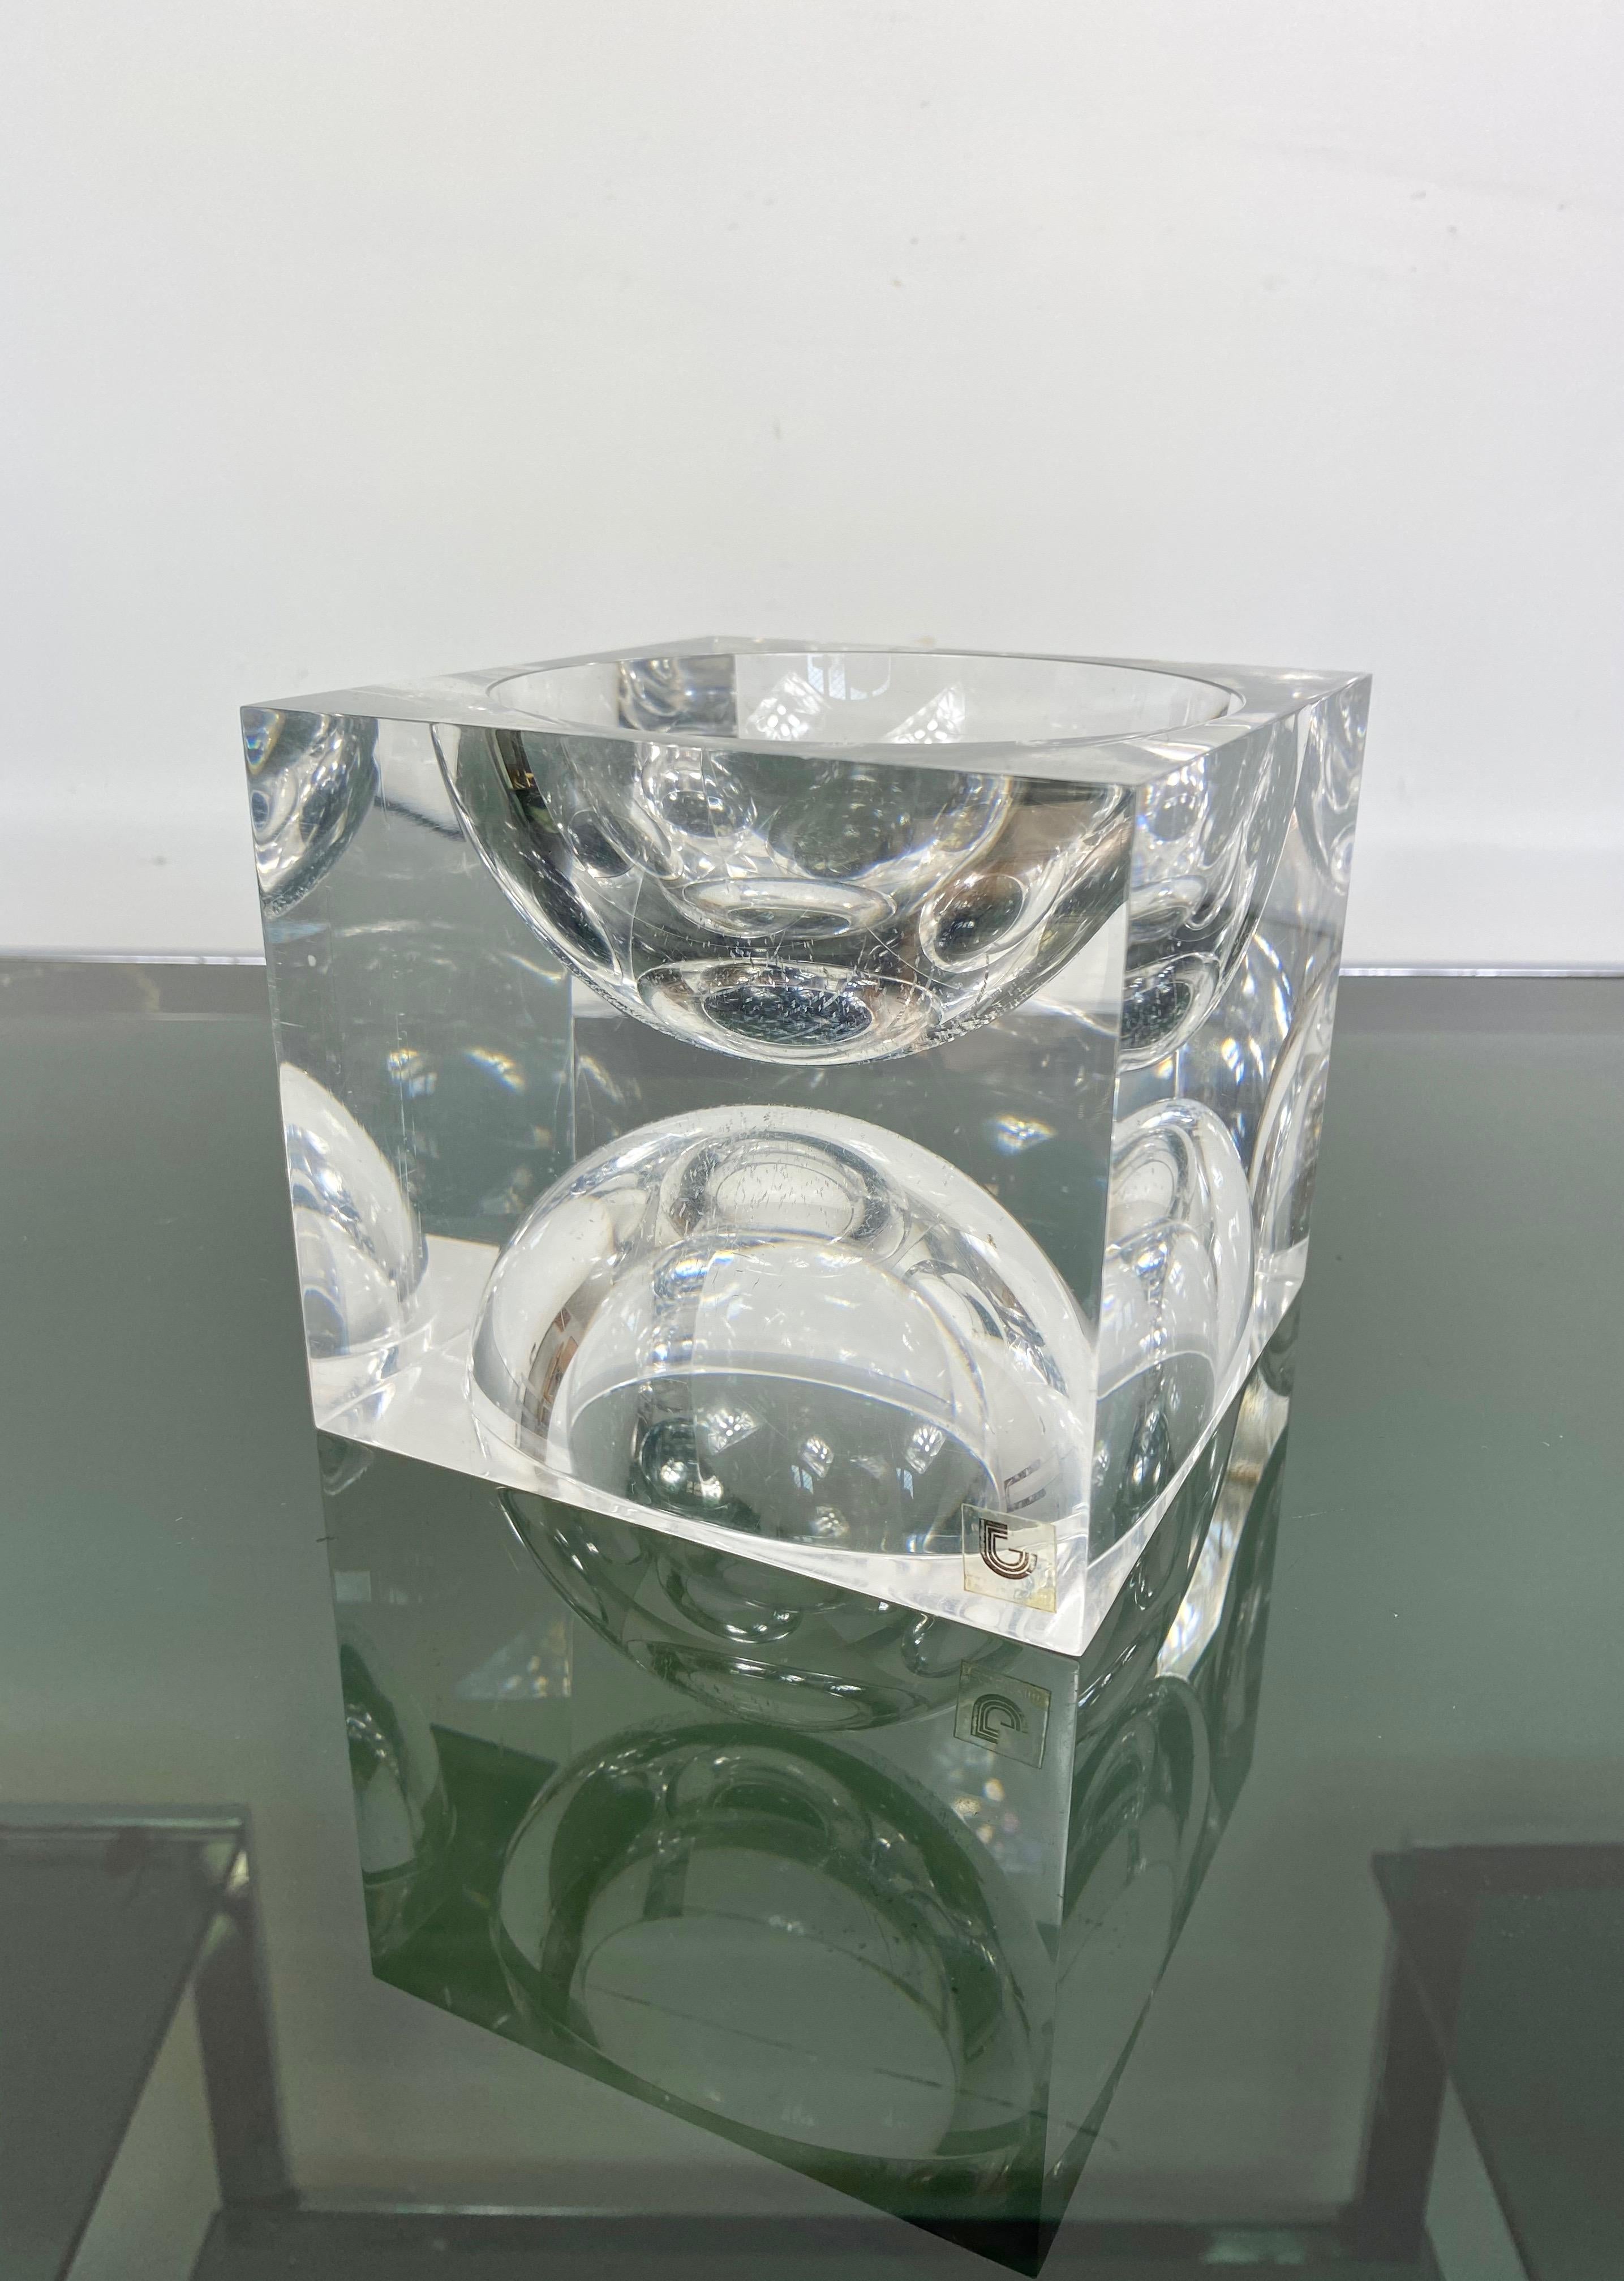 Cubic sculpture by Team Guzzini in Lucite acrylic - Italy, 1970. 

It still has its original label attached as shown in the photos.